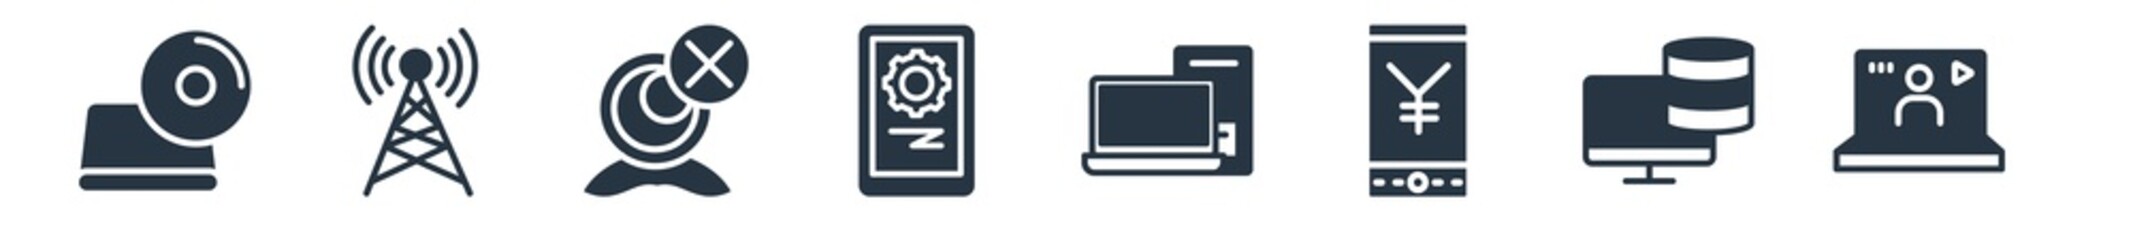 computer filled icons. glyph vector icons such as video lecture, pc storage, yen currency on tablet screen, computer tower and the monitor, tablet data settings, webcam disconnected,